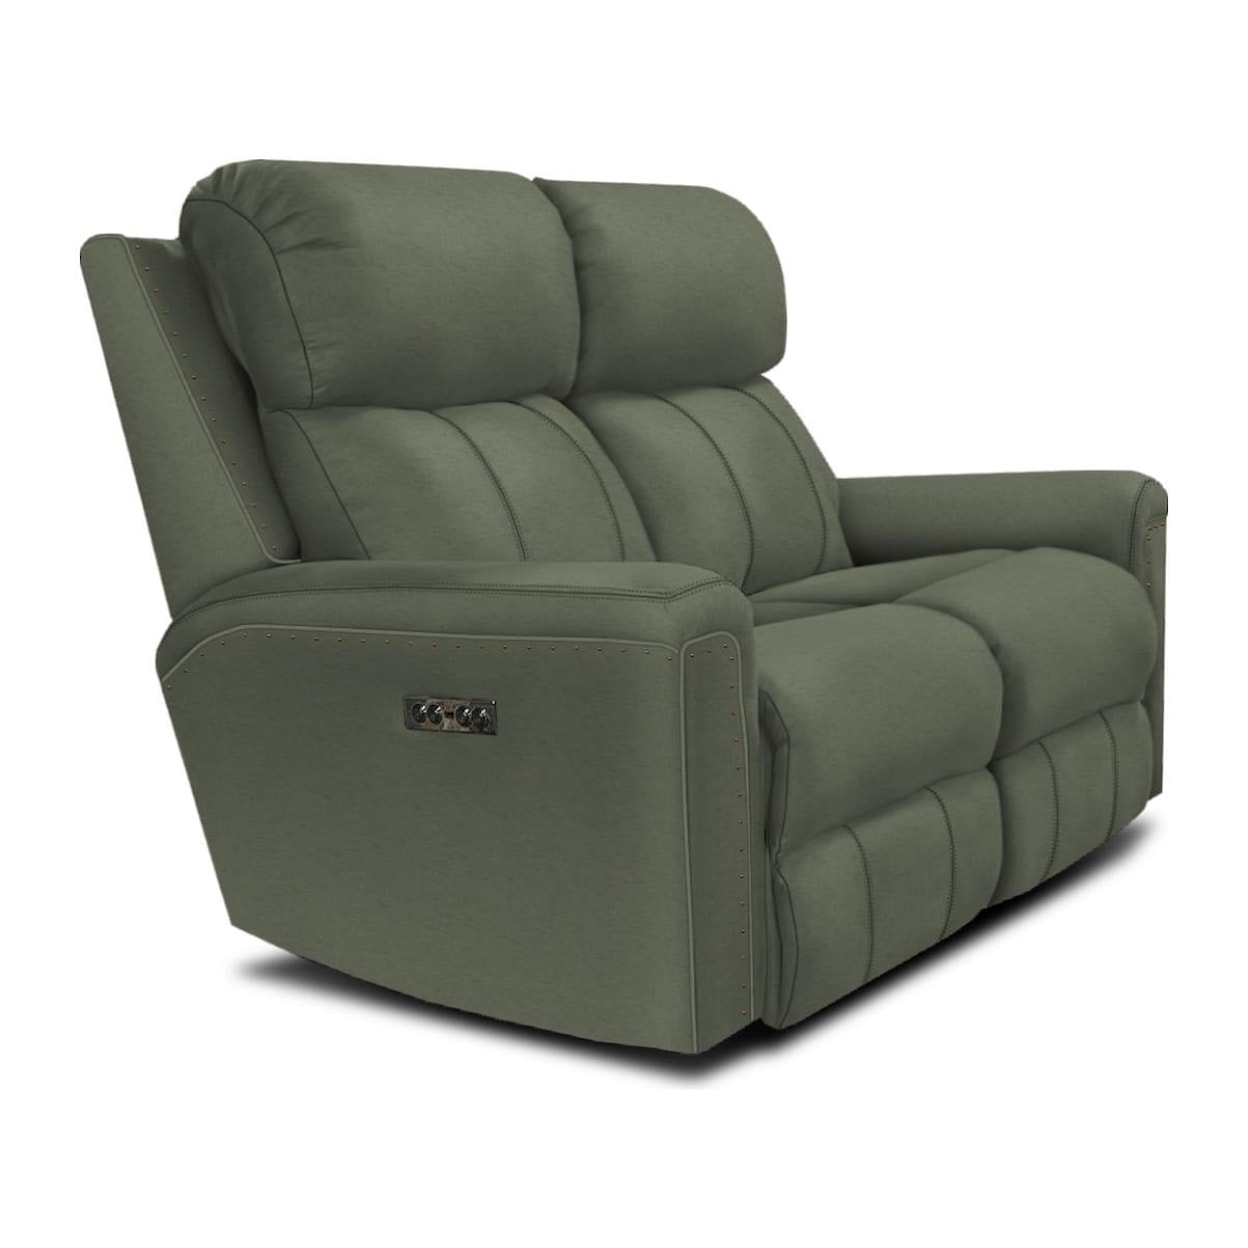 England EZ1C00/H/N Series EZ1C00H Double Reclining Loveseat with Nails